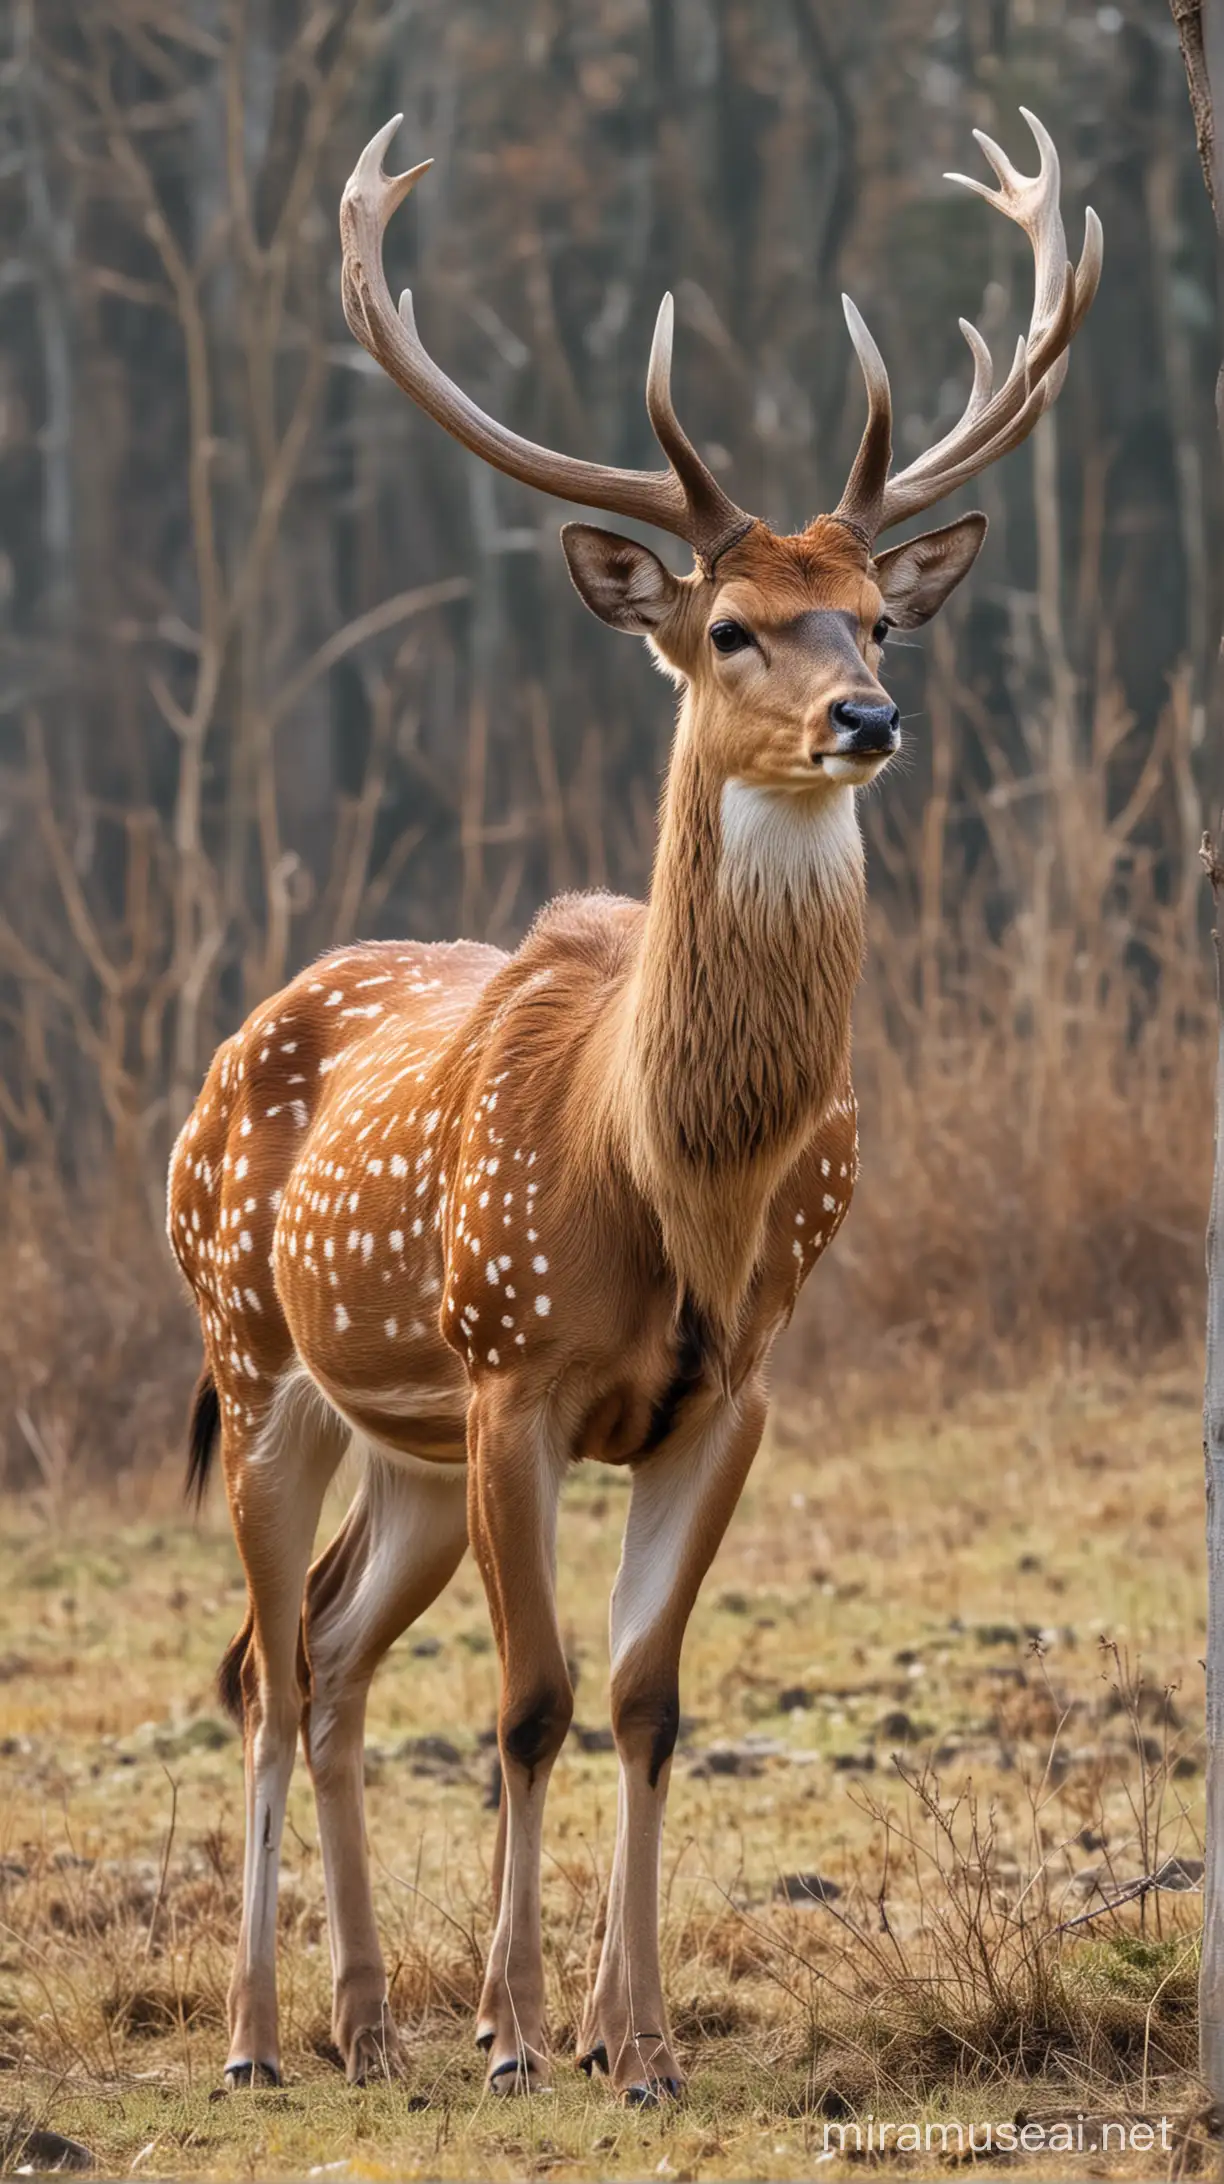 Majestic Spotted Deer with Impressive Antlers